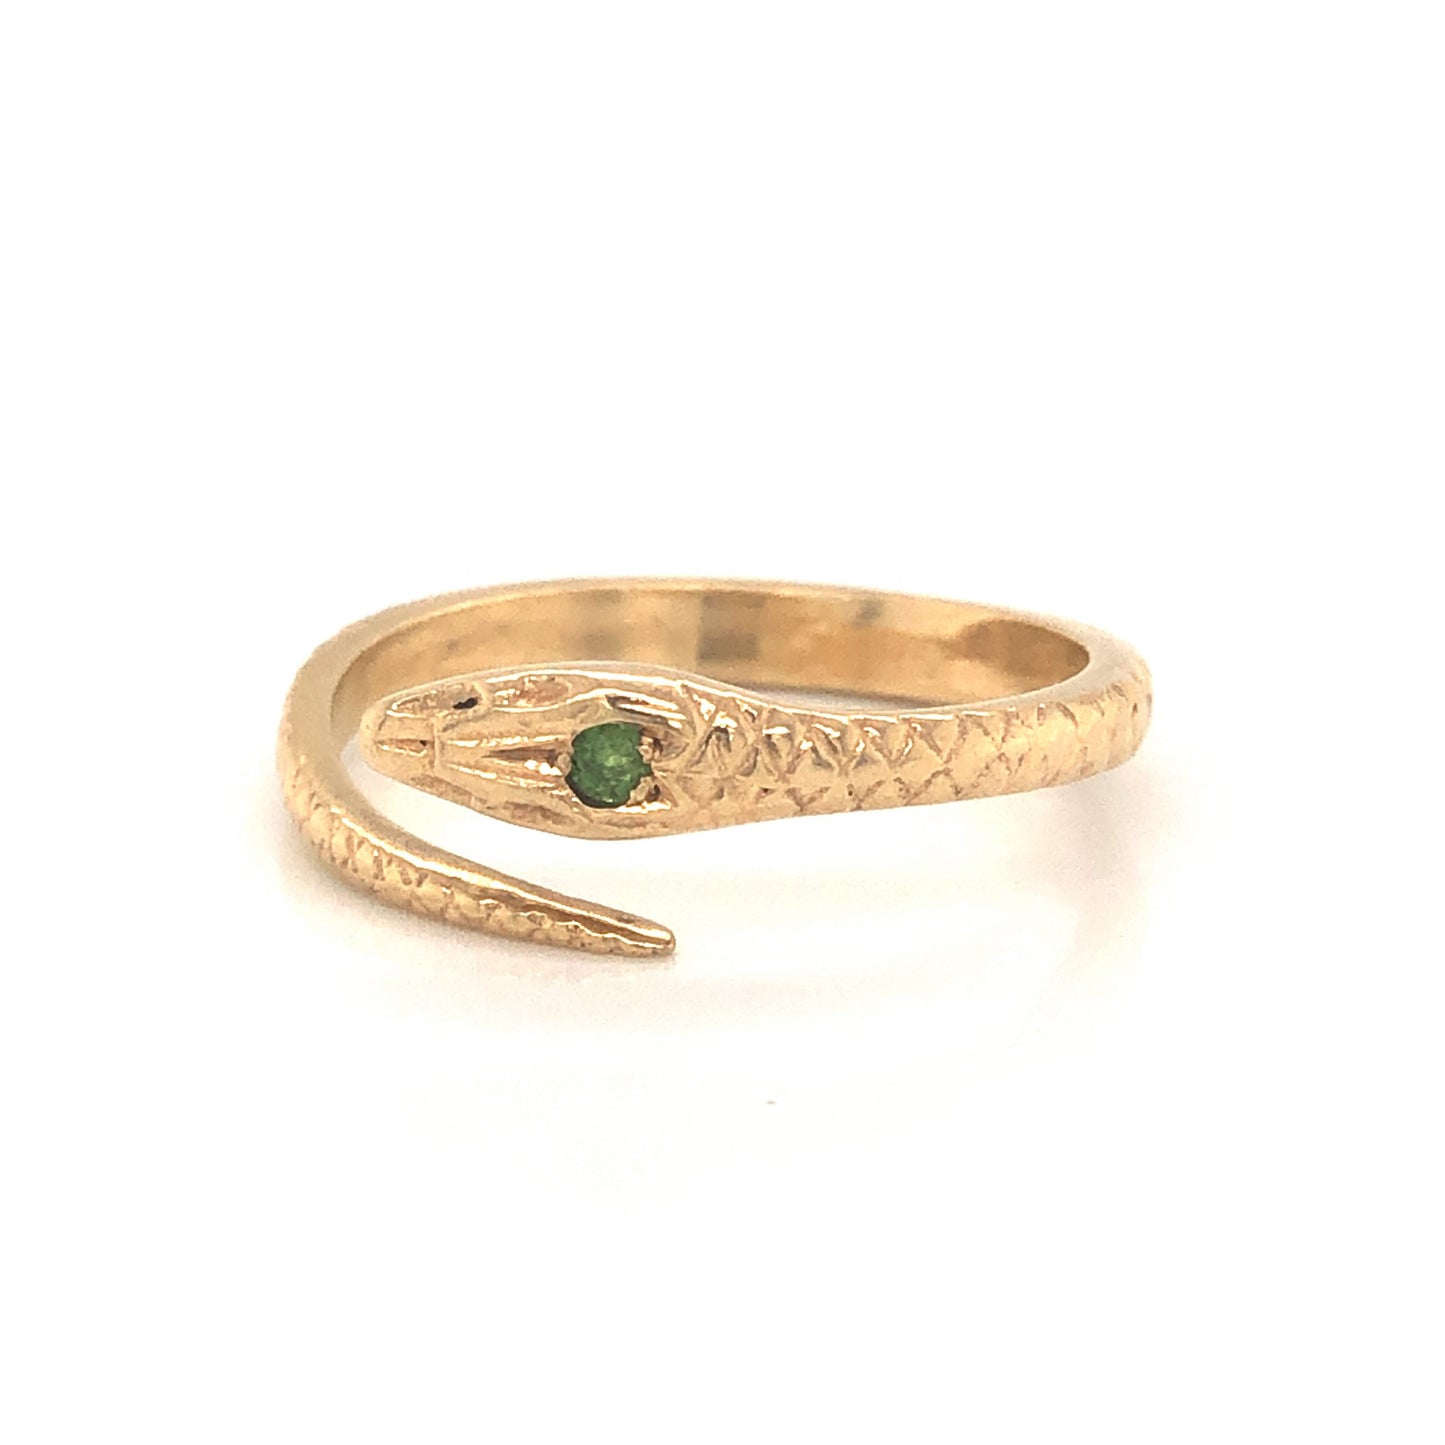 Victorian Peridot Snake Ring in 14k Yellow Gold